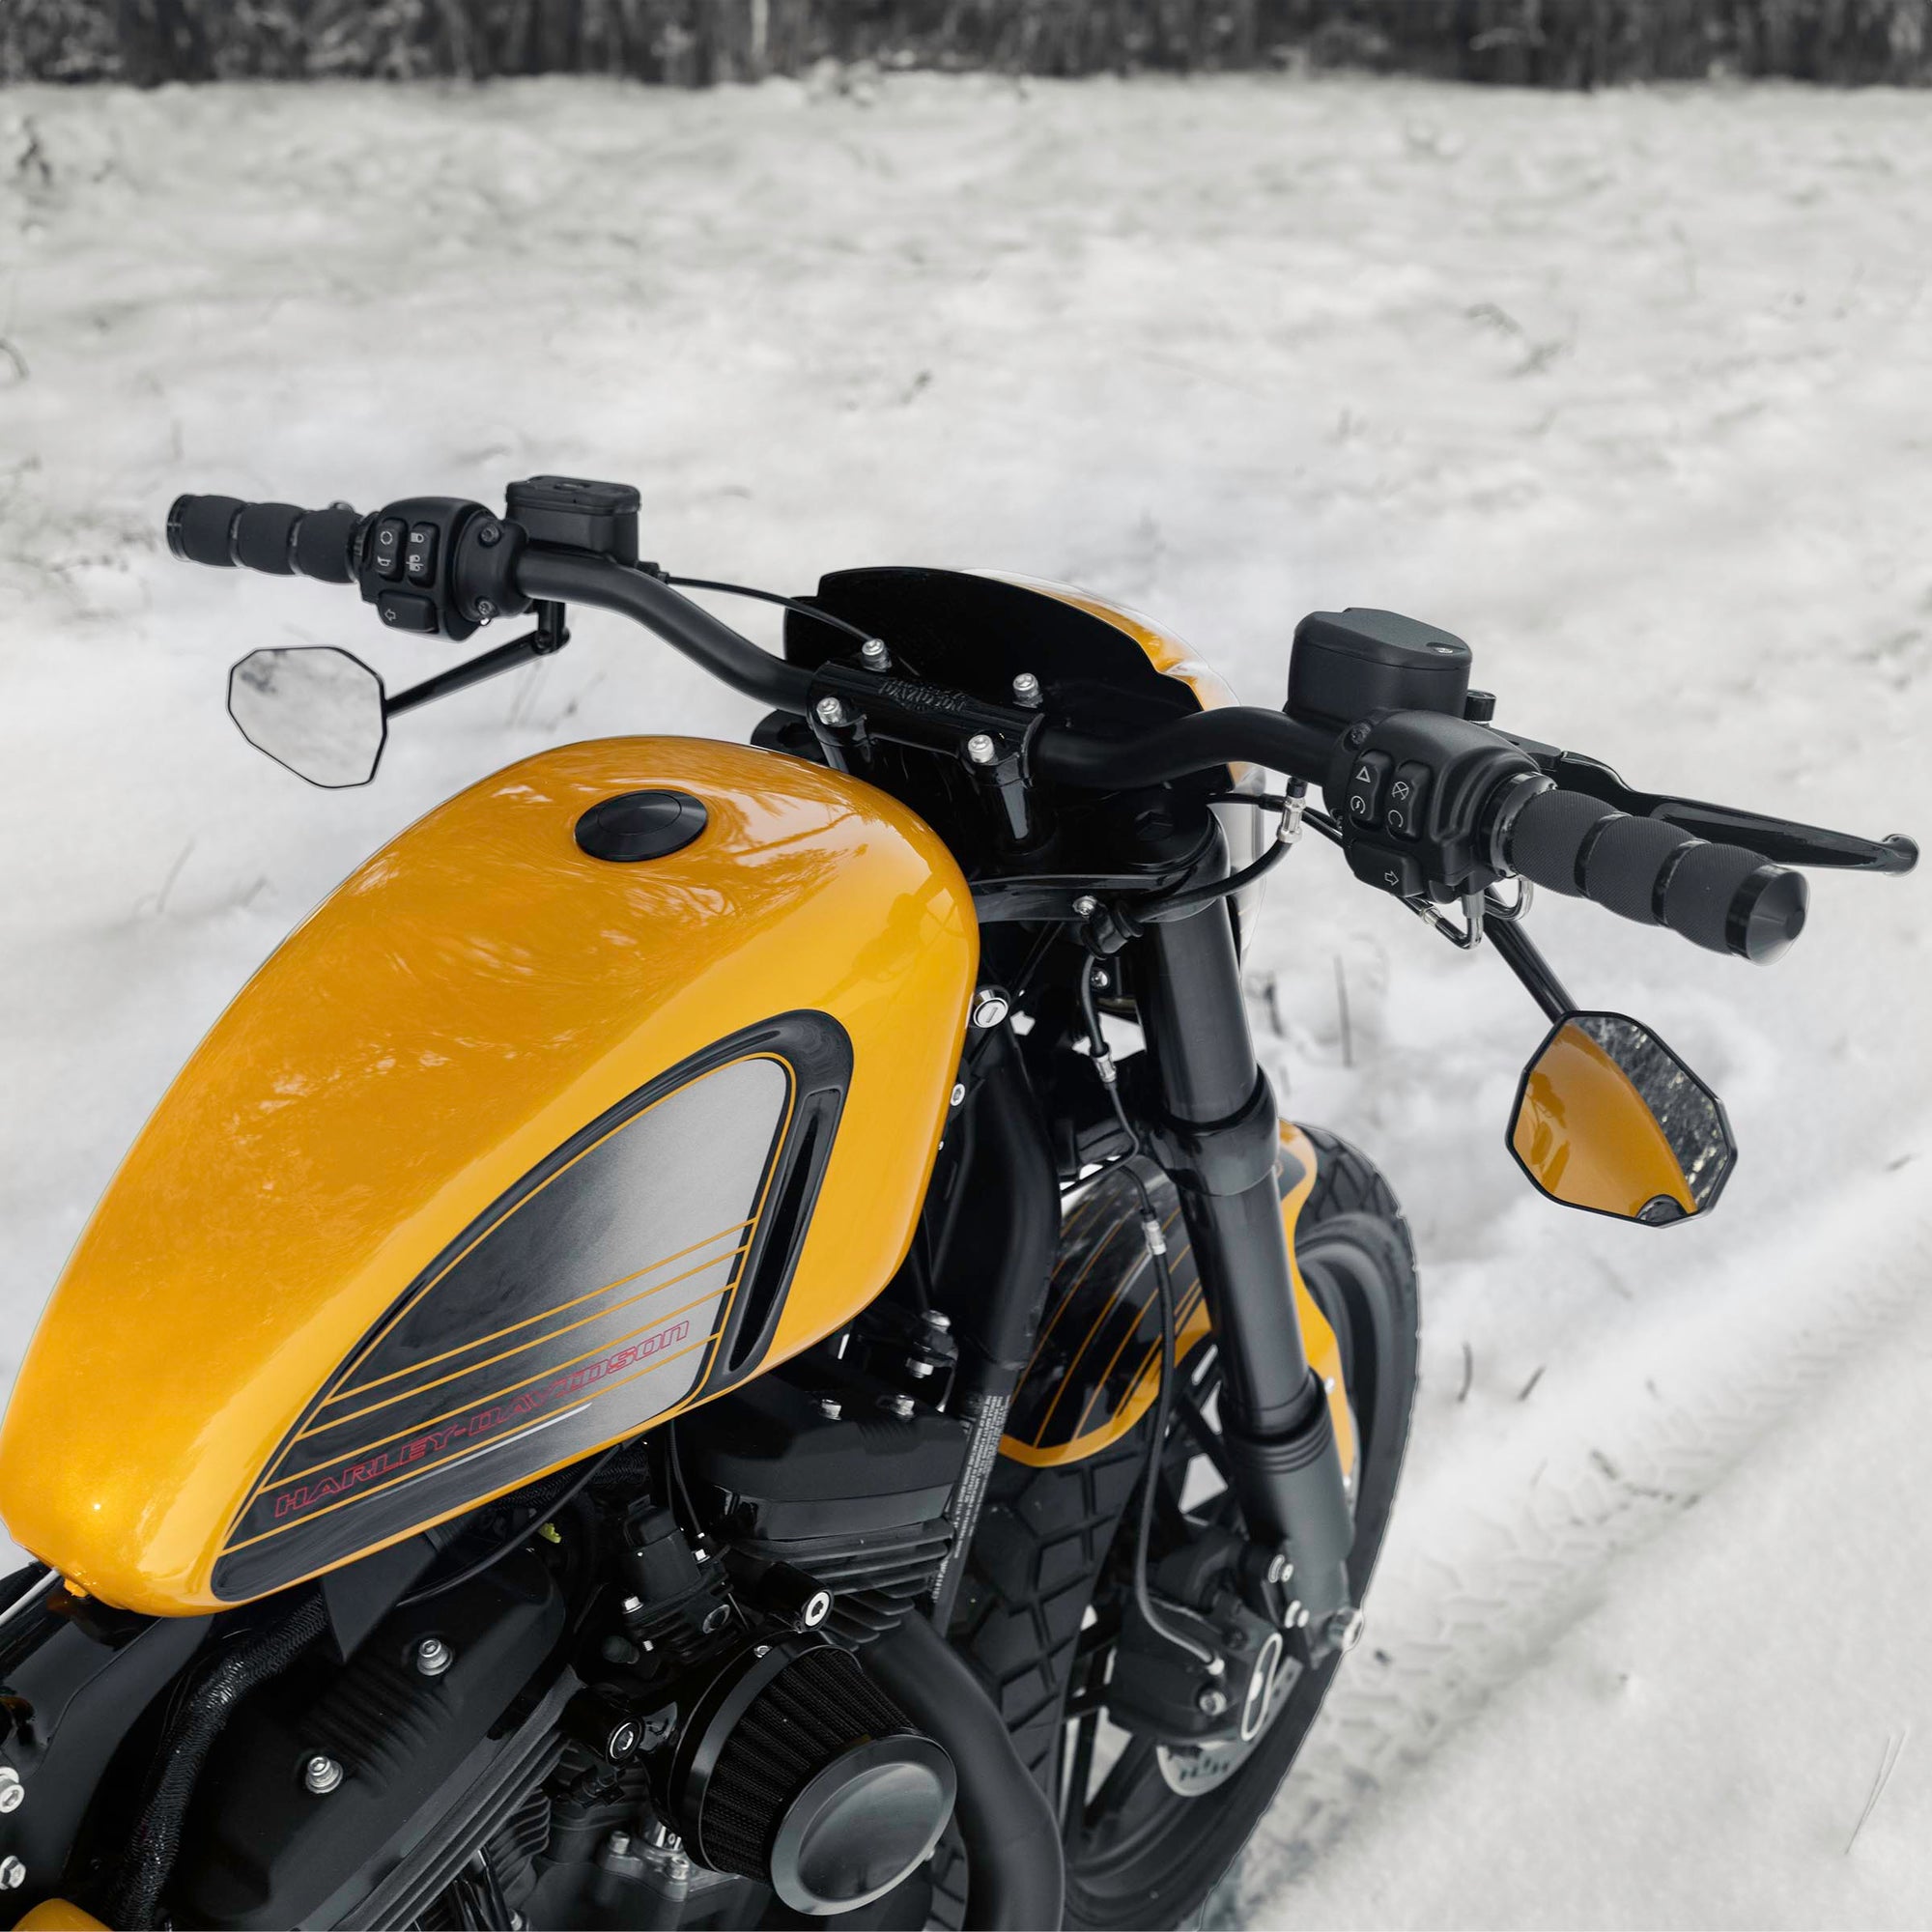 Zoomed Harley Davidson motorcycle with Killer Custom parts from the rear with some snow in the background